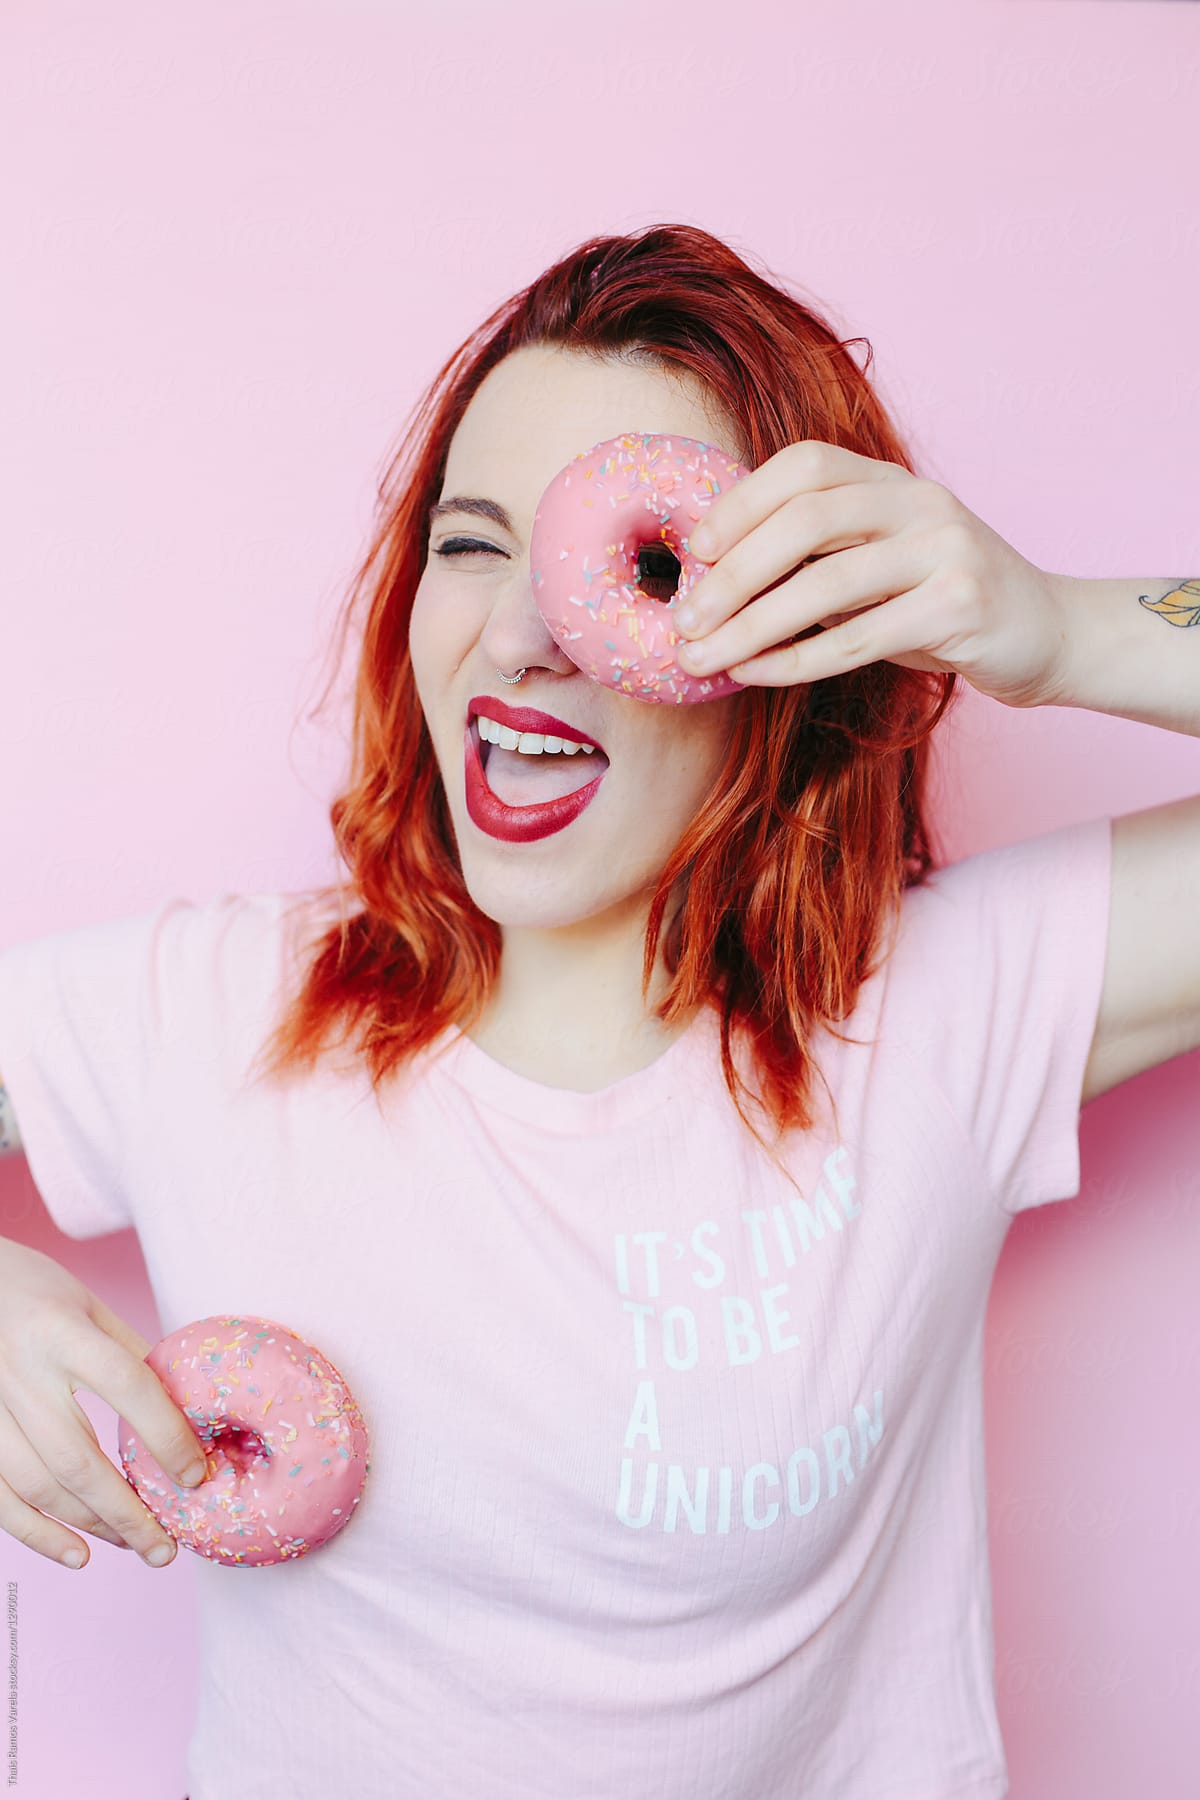 Woman Covering Her Face And Her Boob With A Pink Doughnut By Stocksy